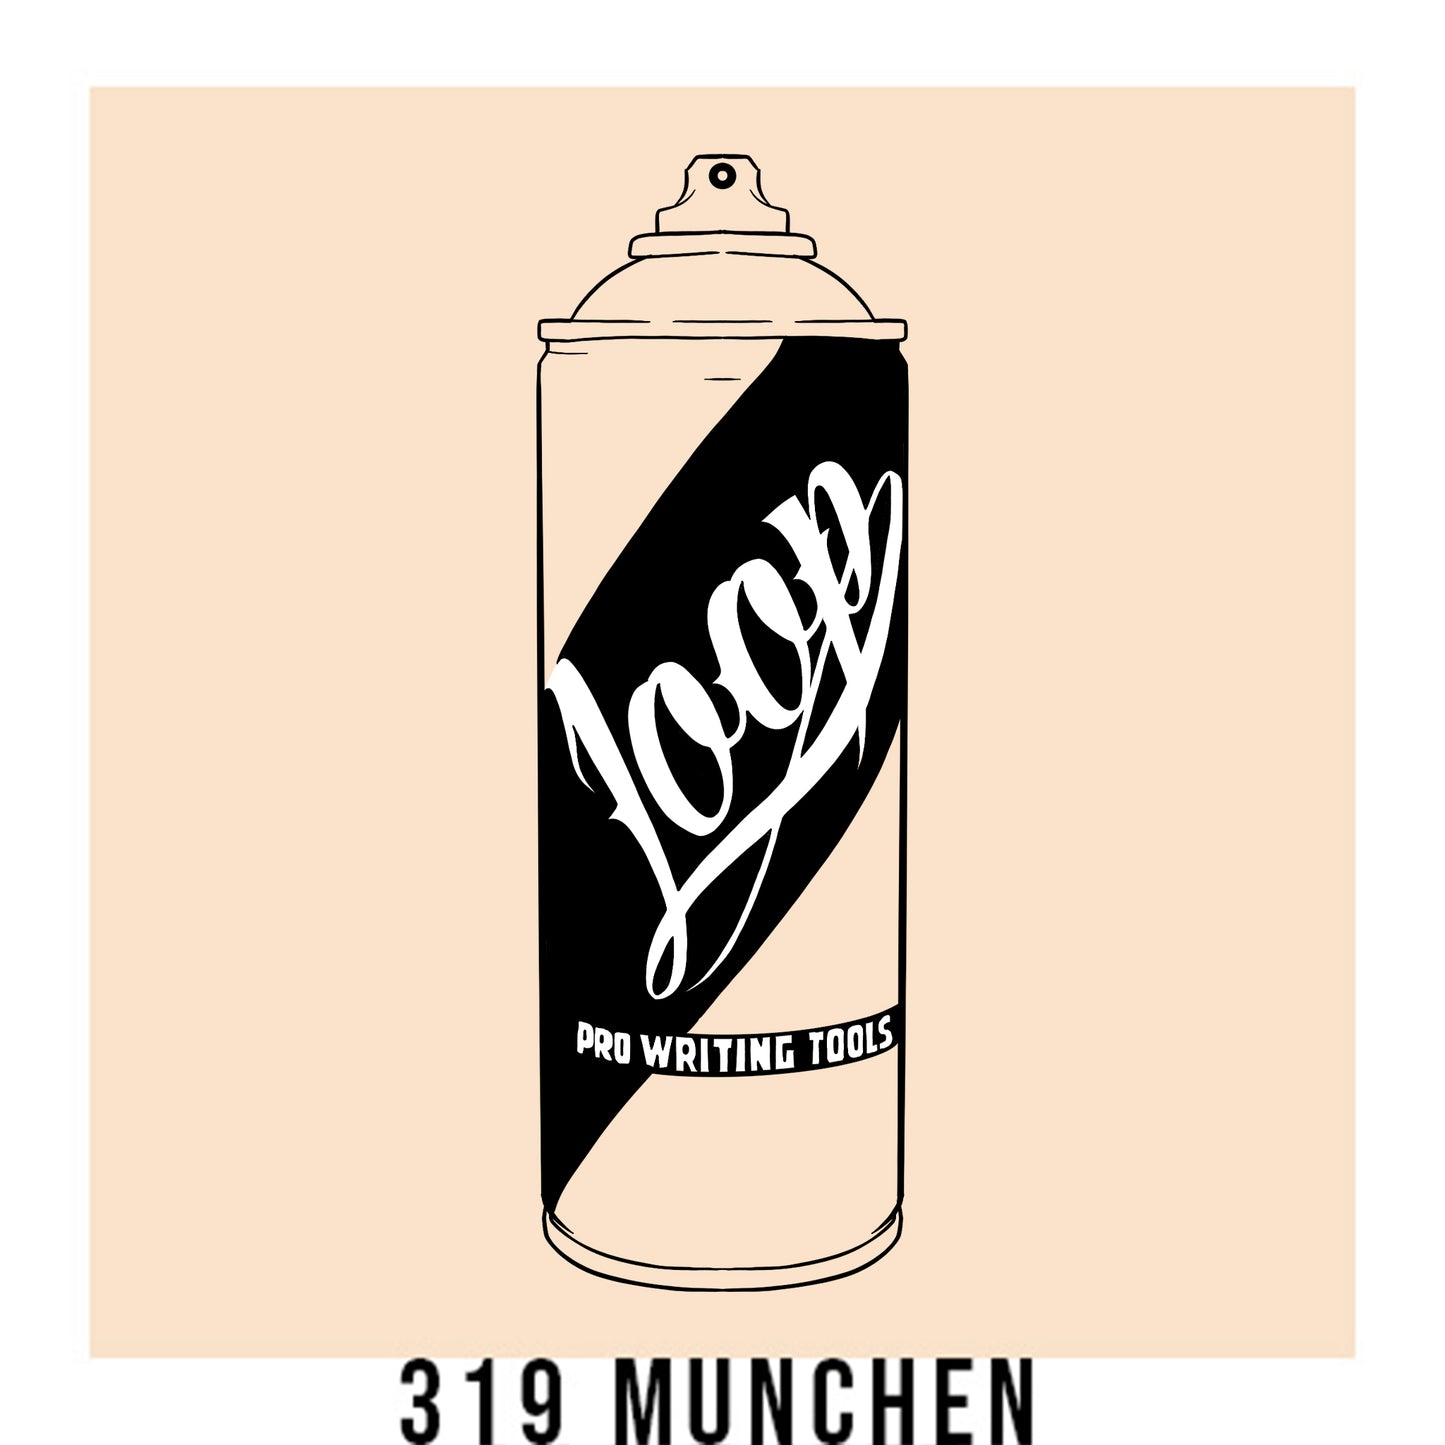 A black outline drawing of a pastel peach spray paint can with the word "Loop" written on the face in script. The background is a color swatch of the same pastel peach with a white border with the words "319 Munchen" at the bottom.